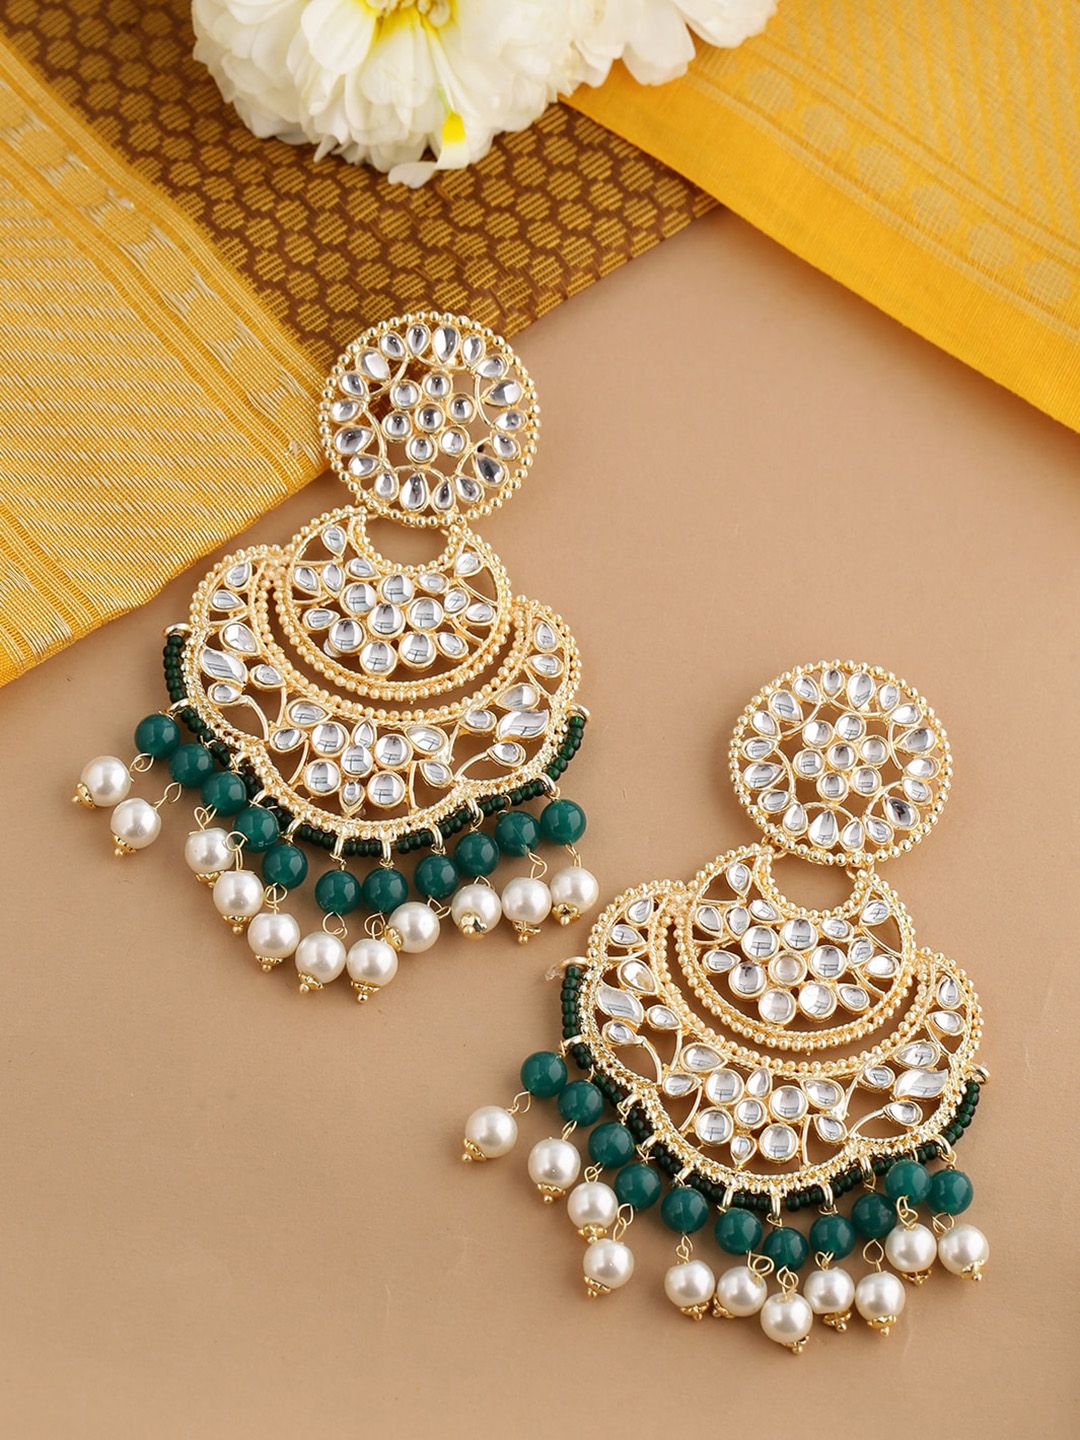 Shoshaa Gold-Toned & Gold-Plated Contemporary Chandbalis Earrings Price in India